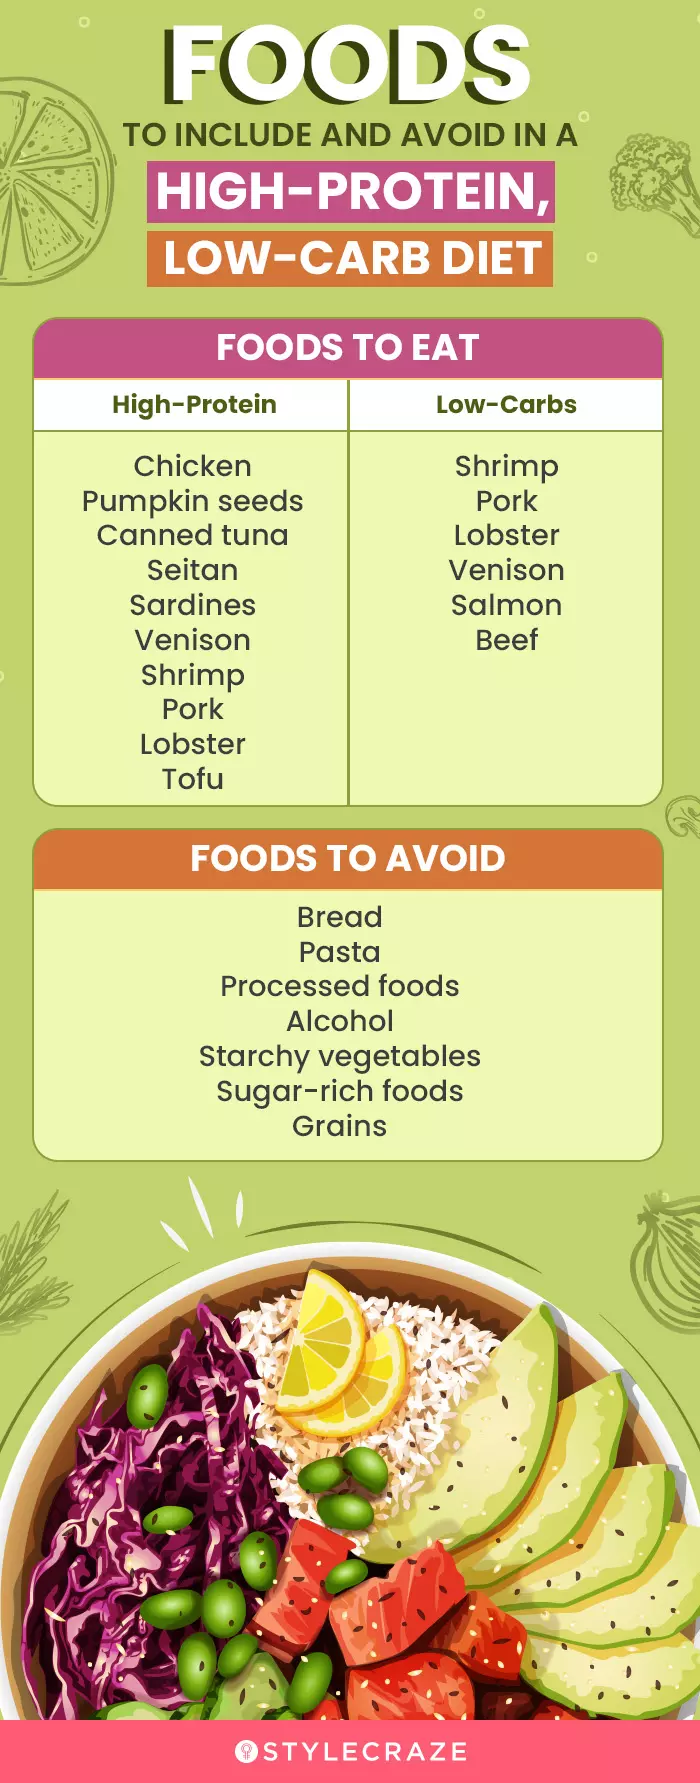 foods to include and avoid in a high protein, low carb diet (infographic)